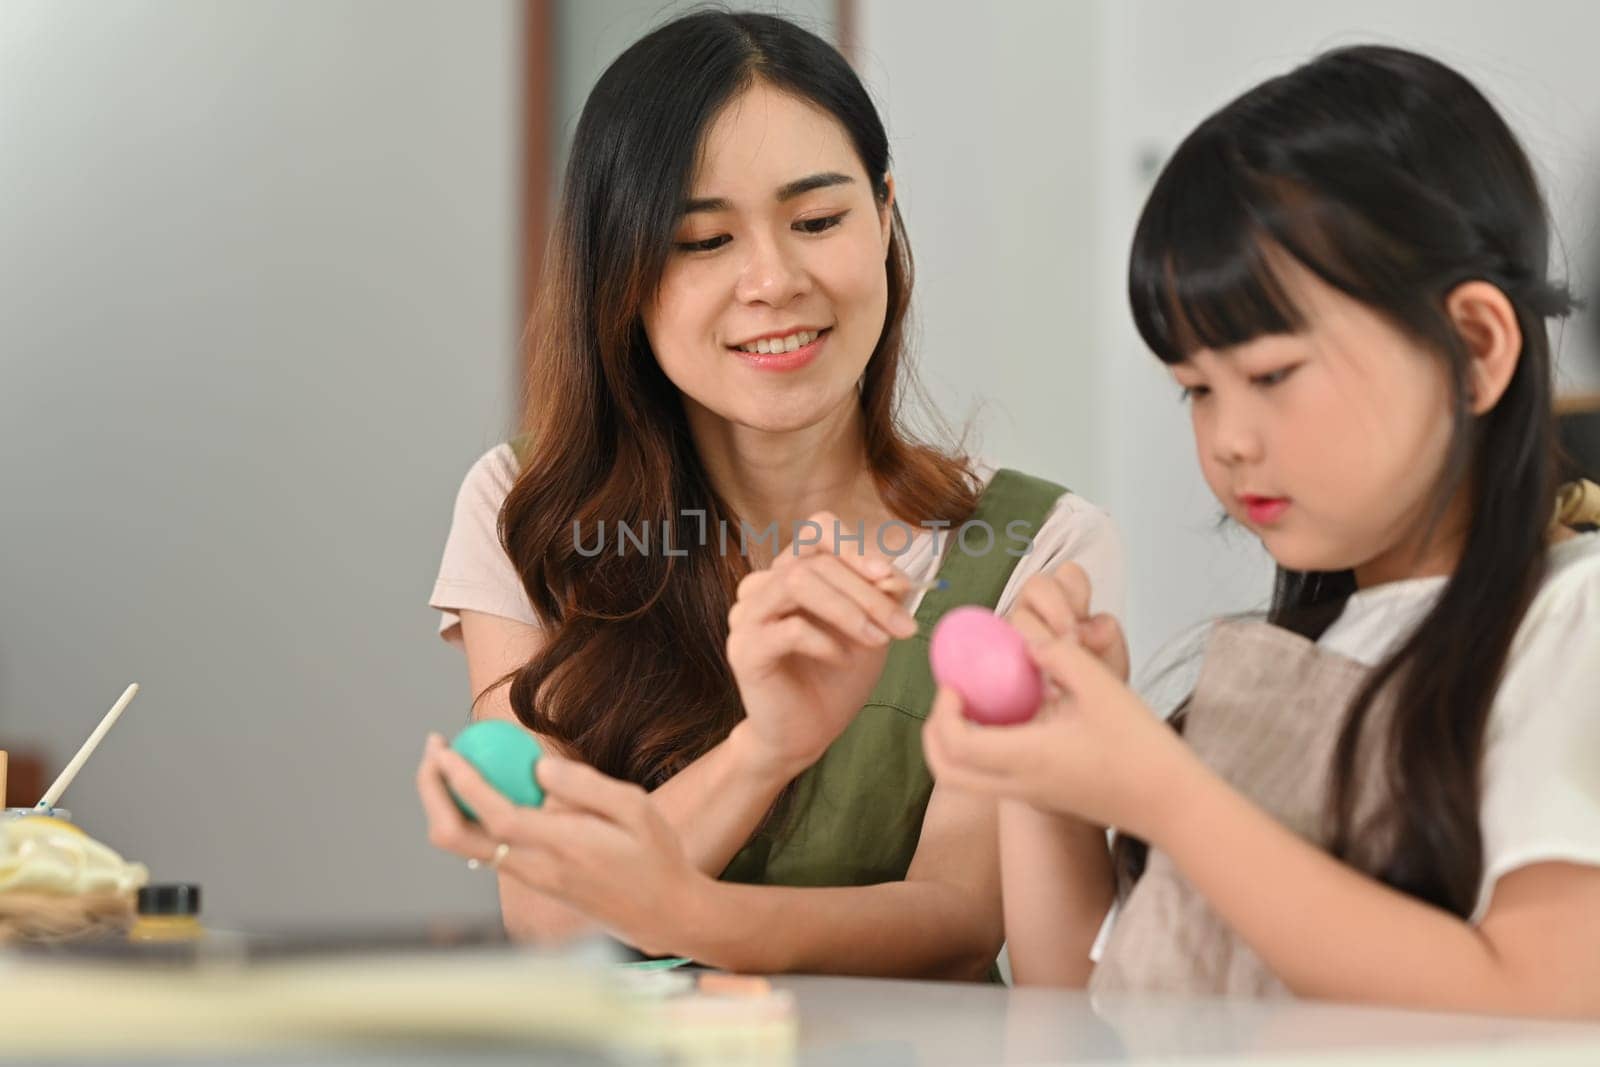 Smiling little girl painting Easter eggs with mother, getting ready for holiday at home.